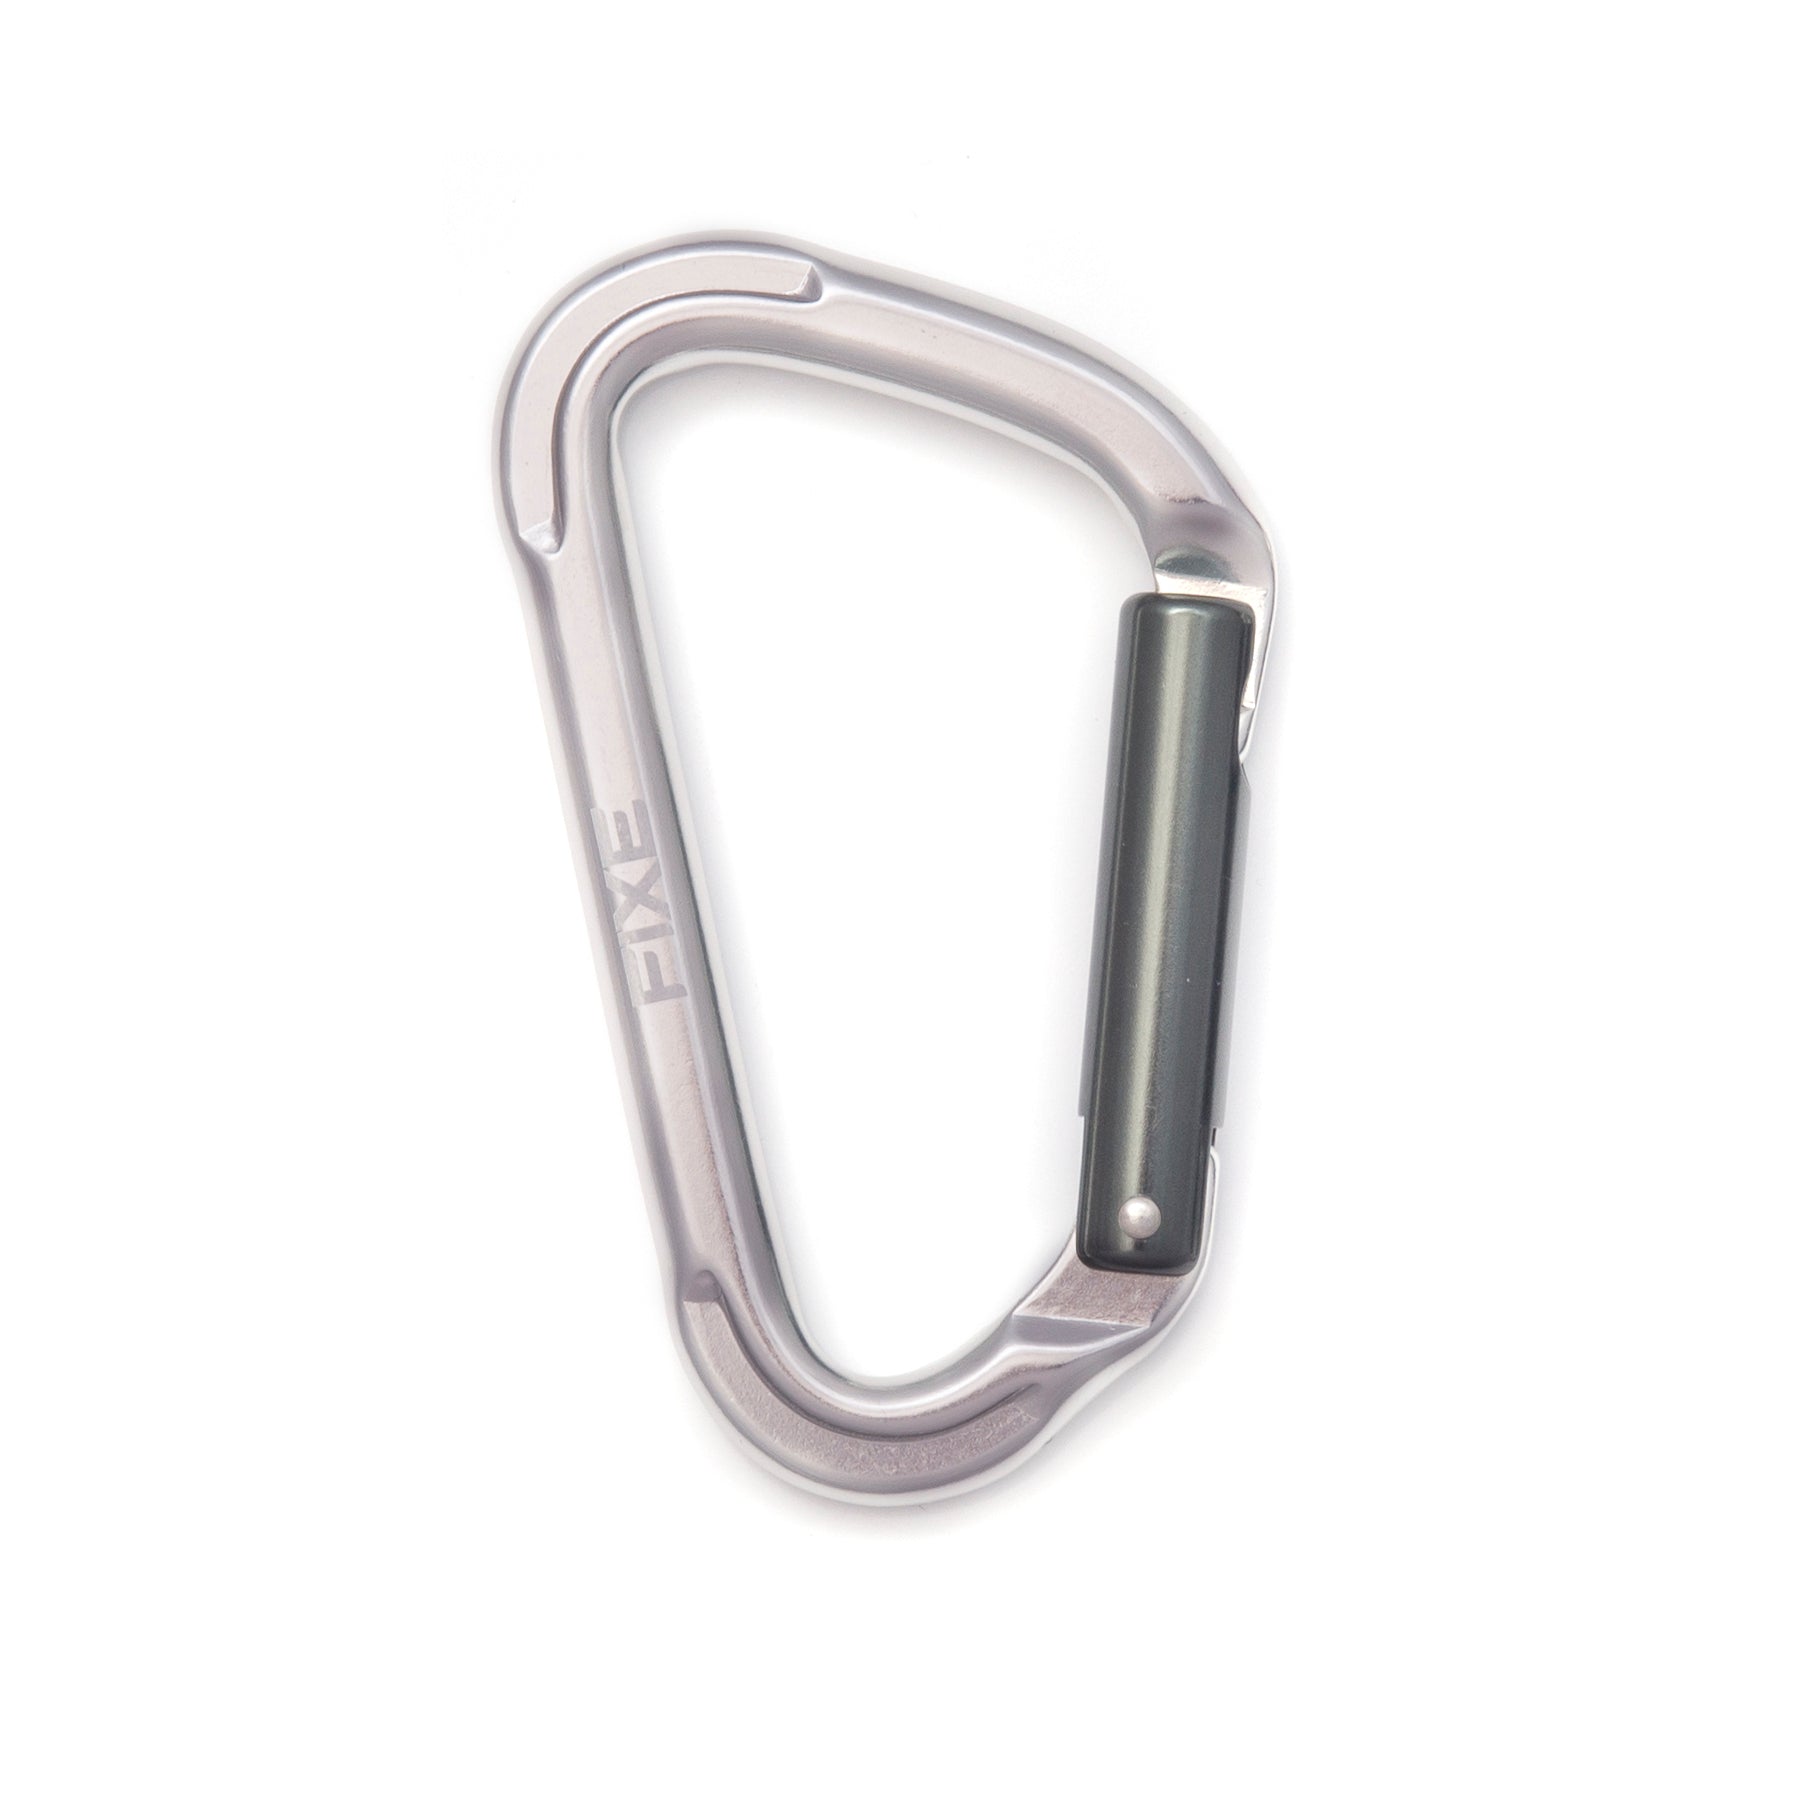 Fixe Montgrony Straight Gate Carabiner-silver